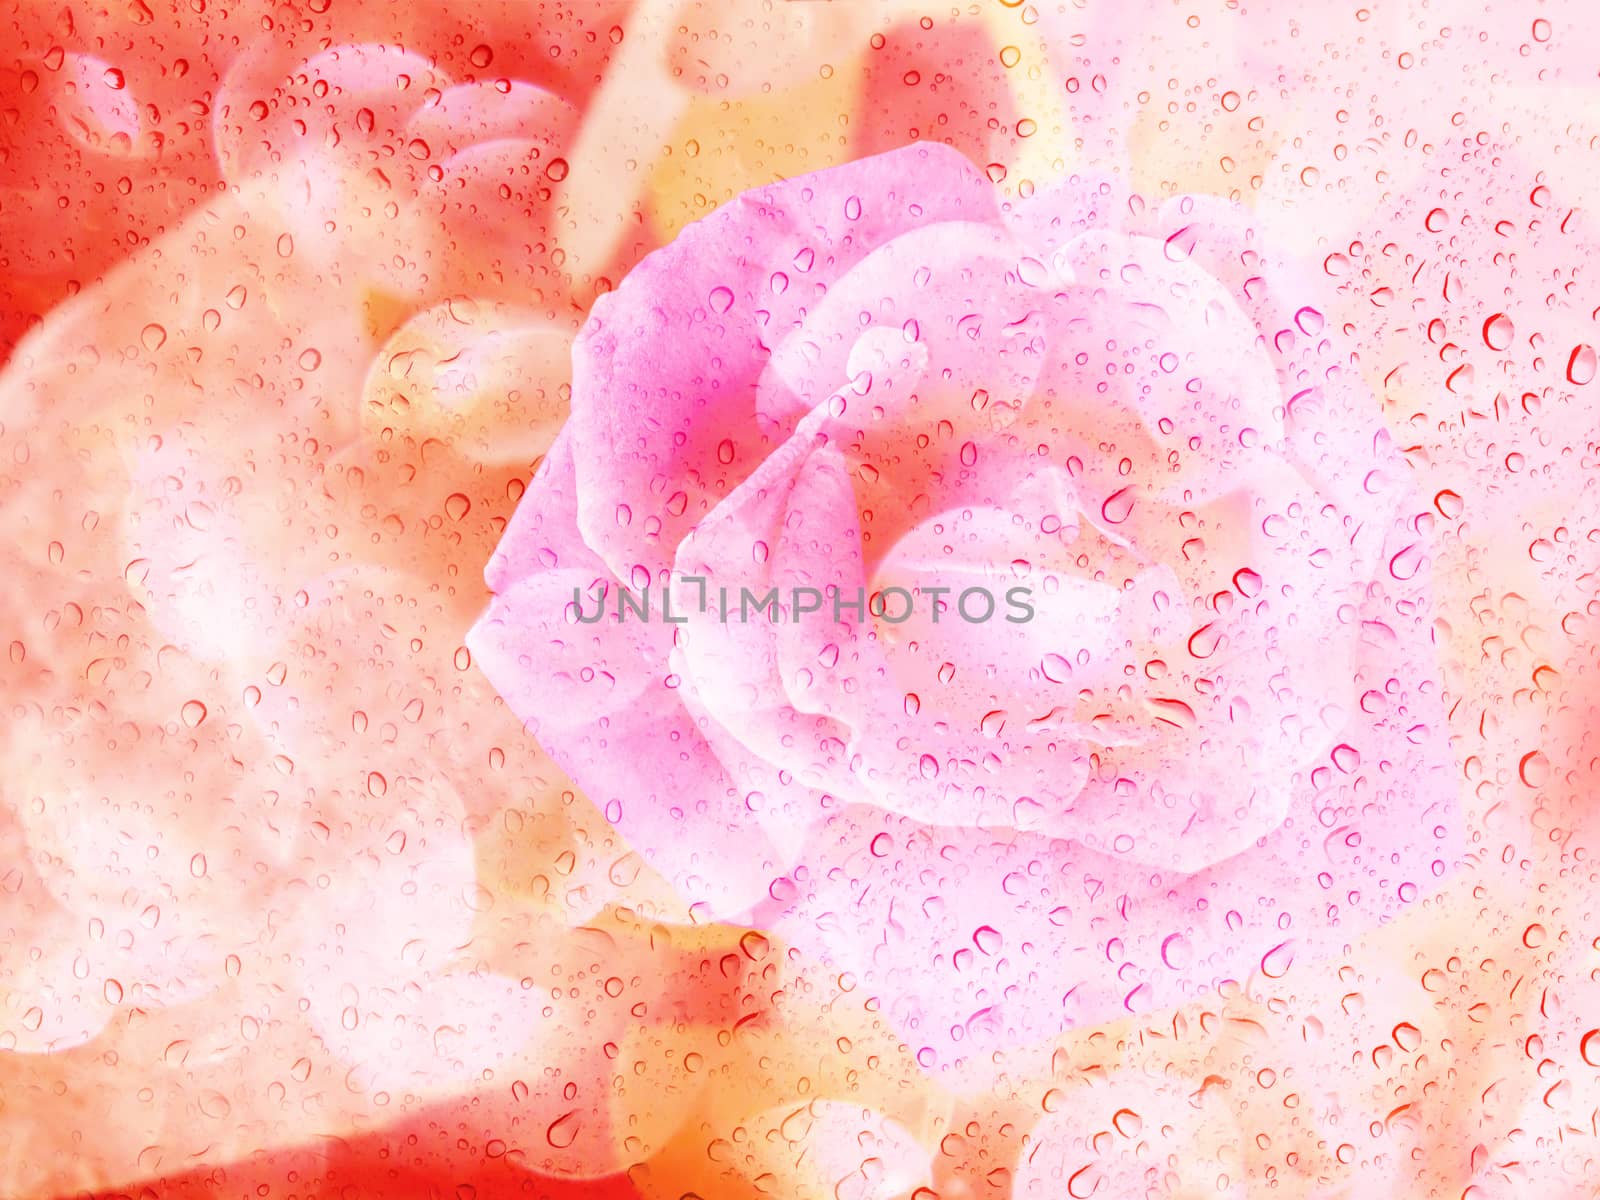 Romantic rose shadow with water drop on glass mirror plate by KAZITAFAHNIZEER